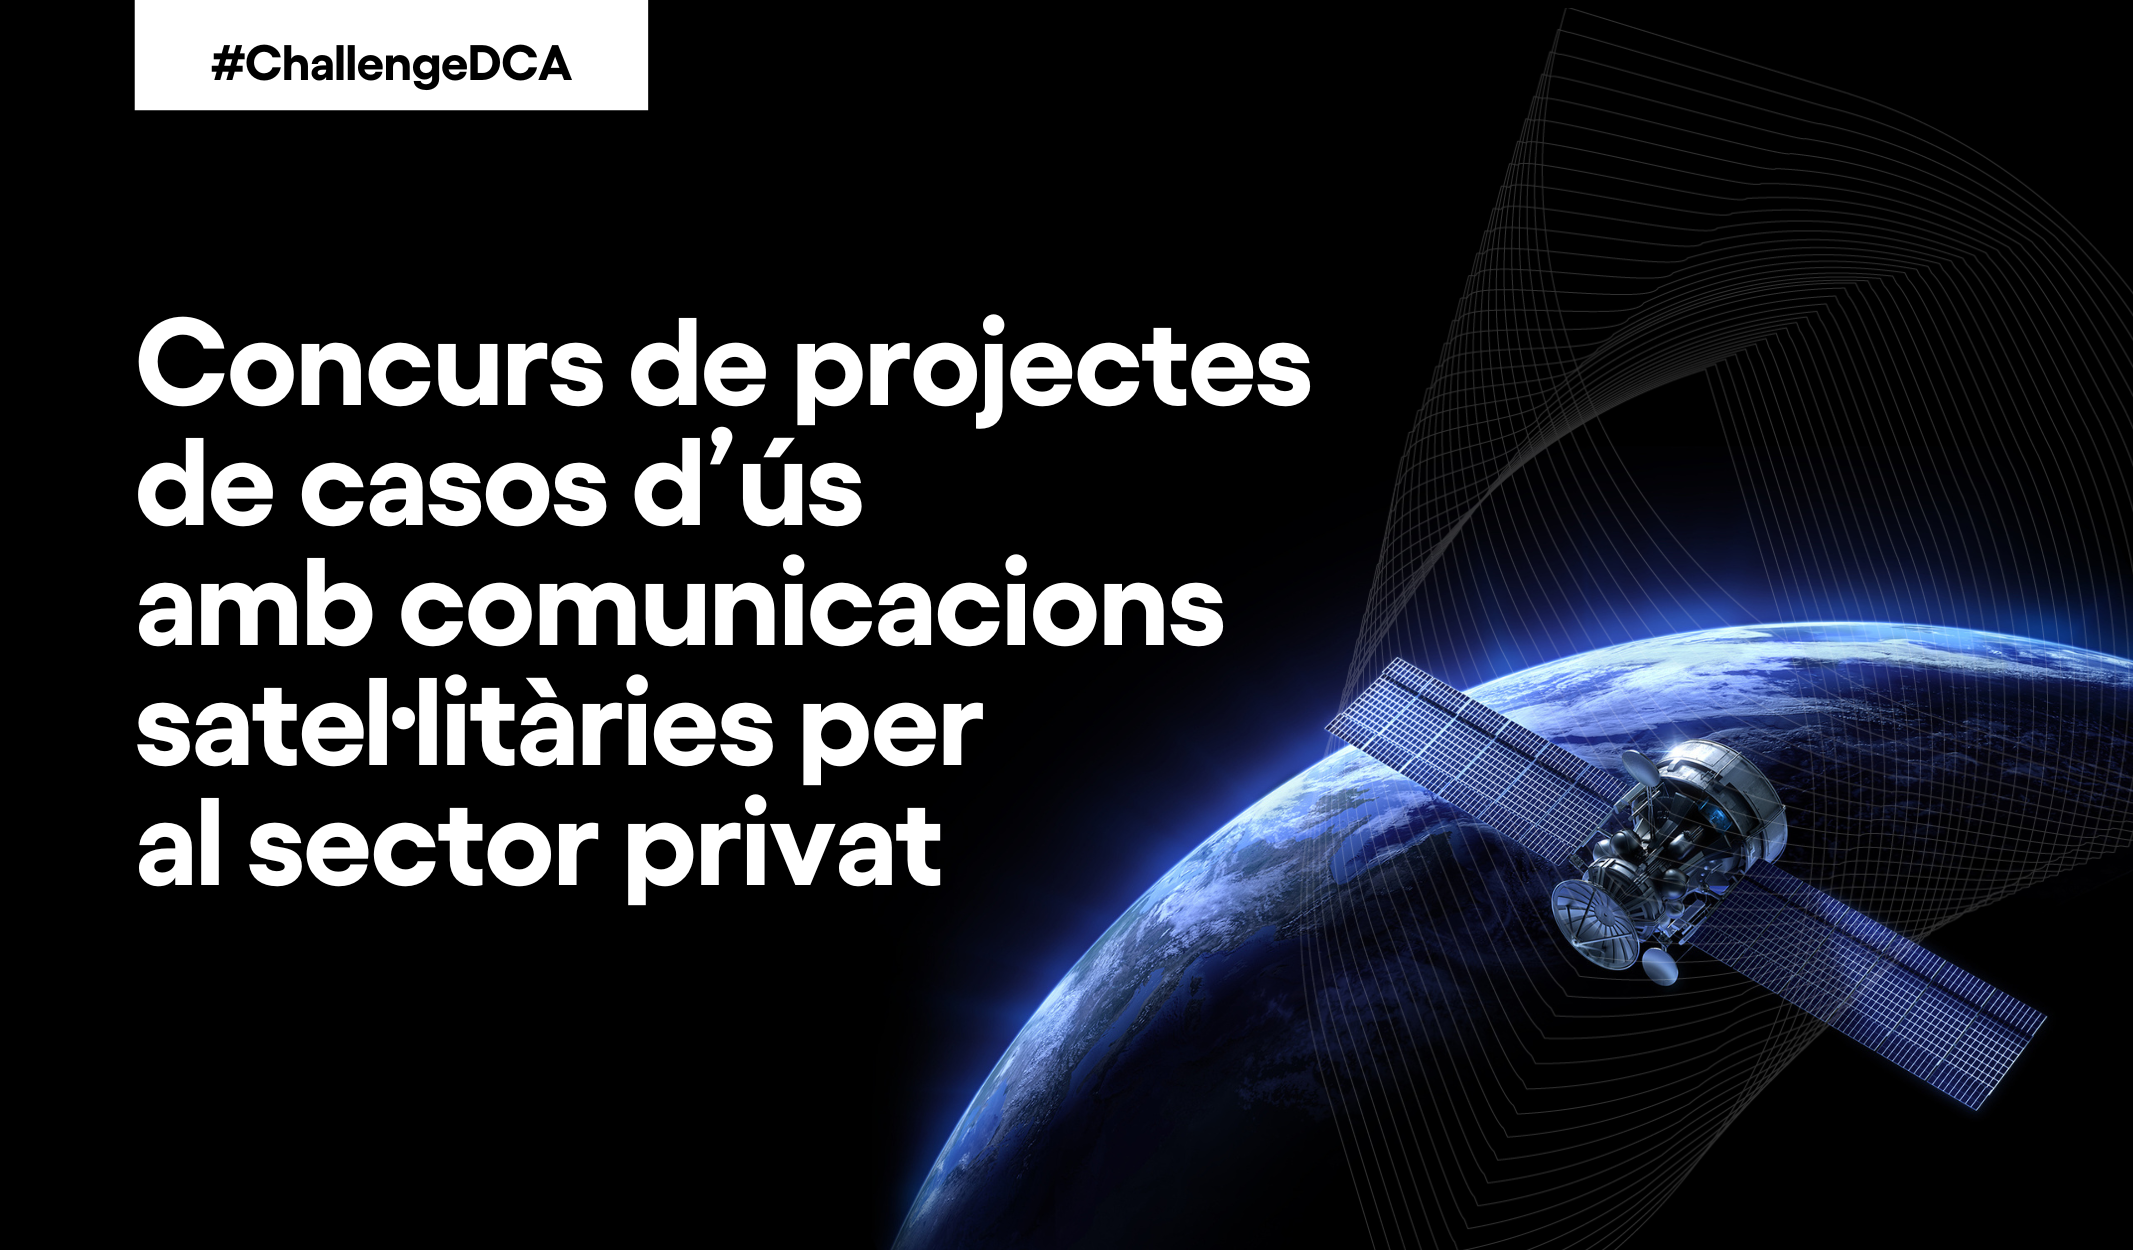 ChallengeDCA: Competition for use case projects with satellite communications for the private sector